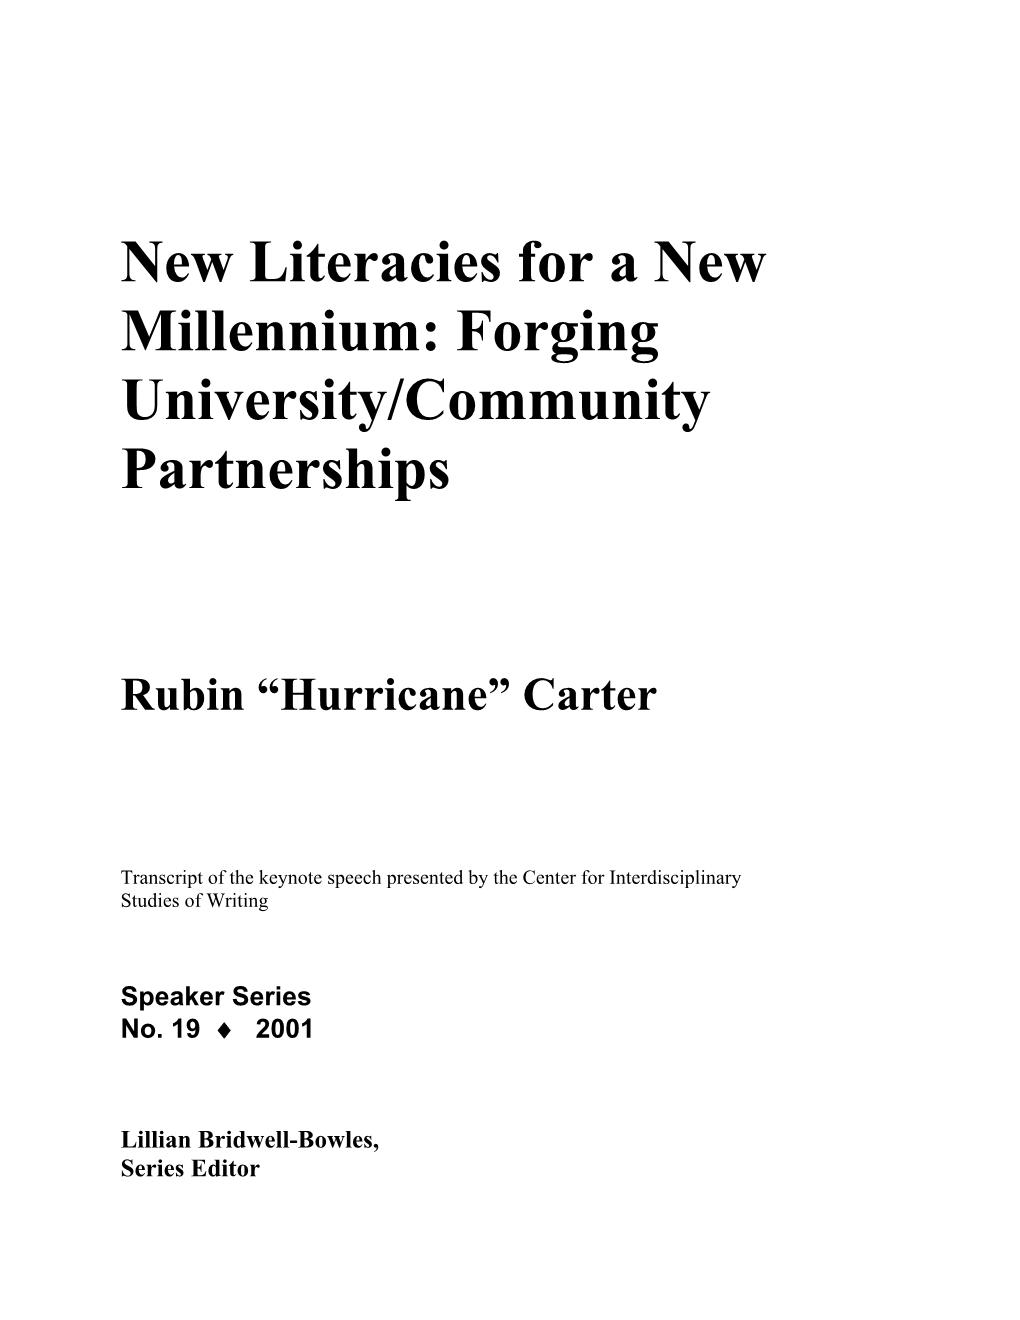 New Literacies for a New Millenium: Forging University/Community